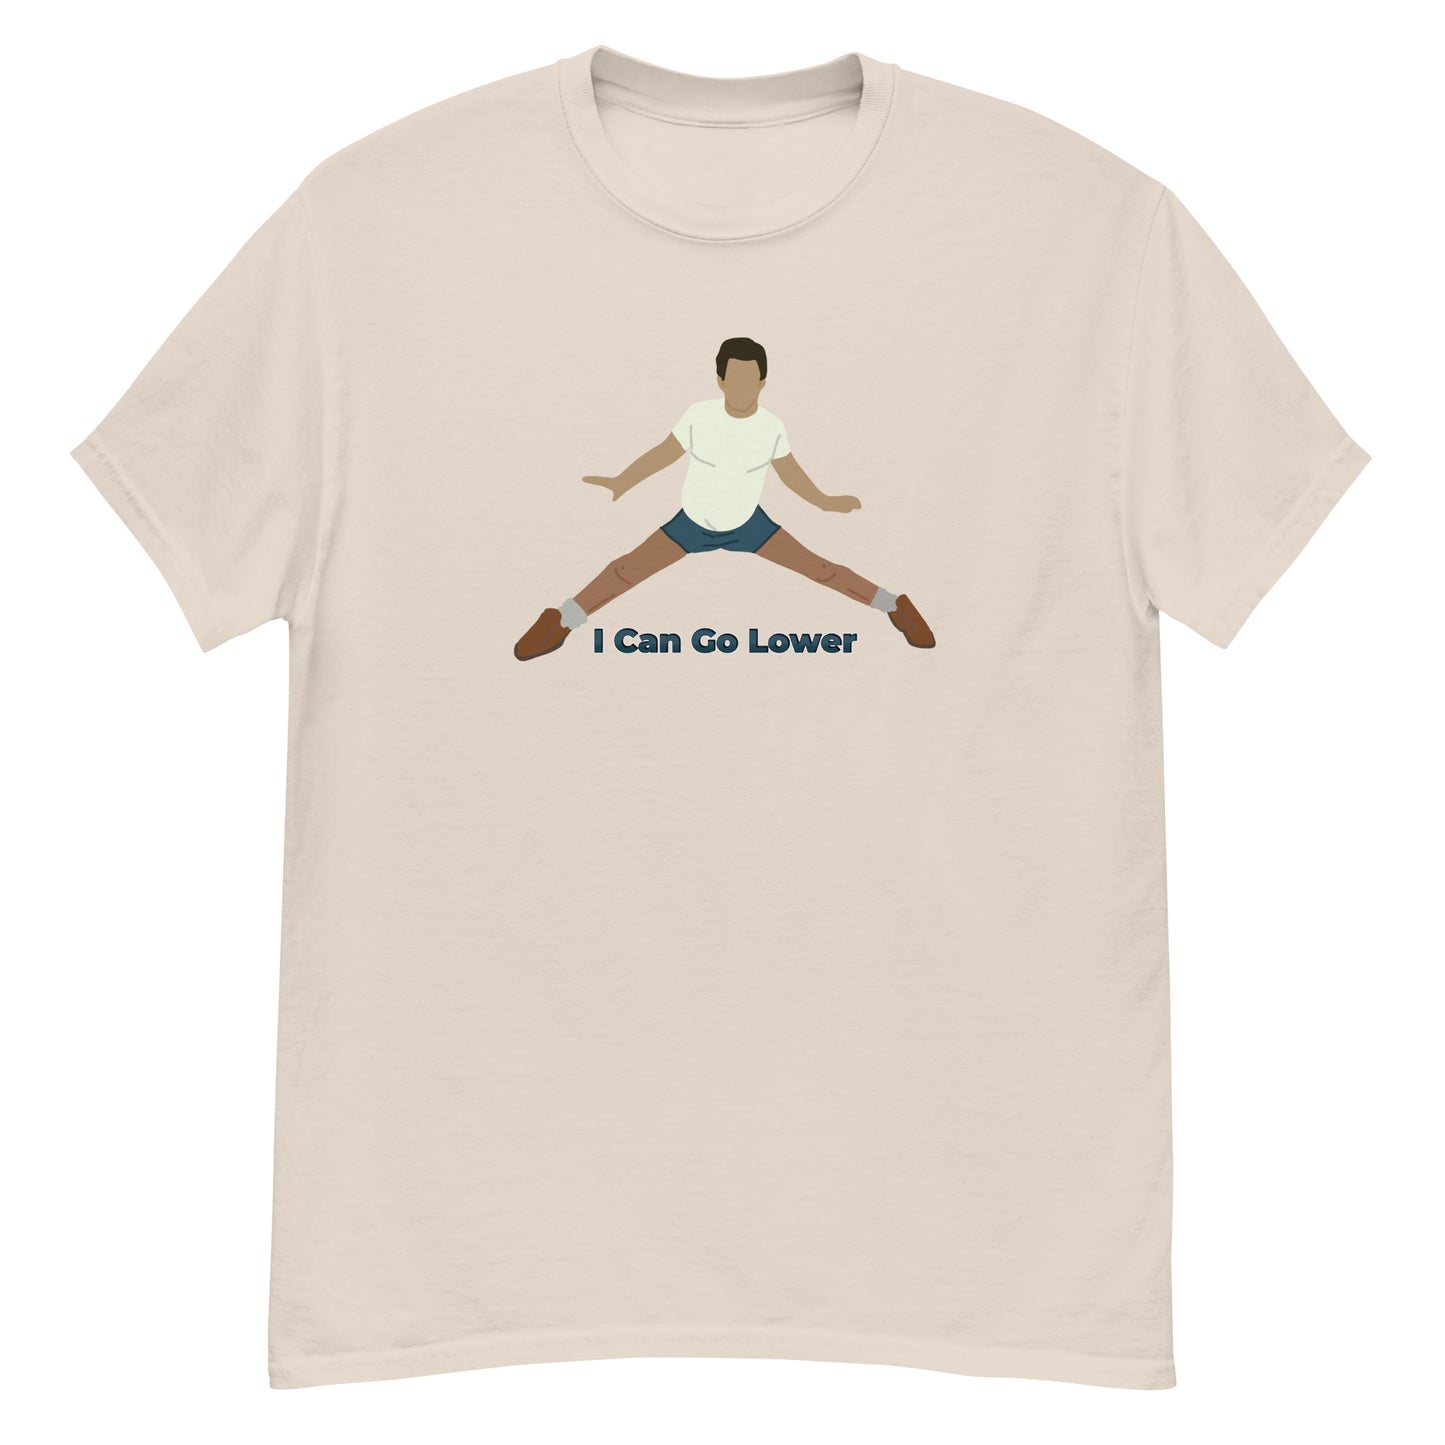 I Can Go Lower classic tee